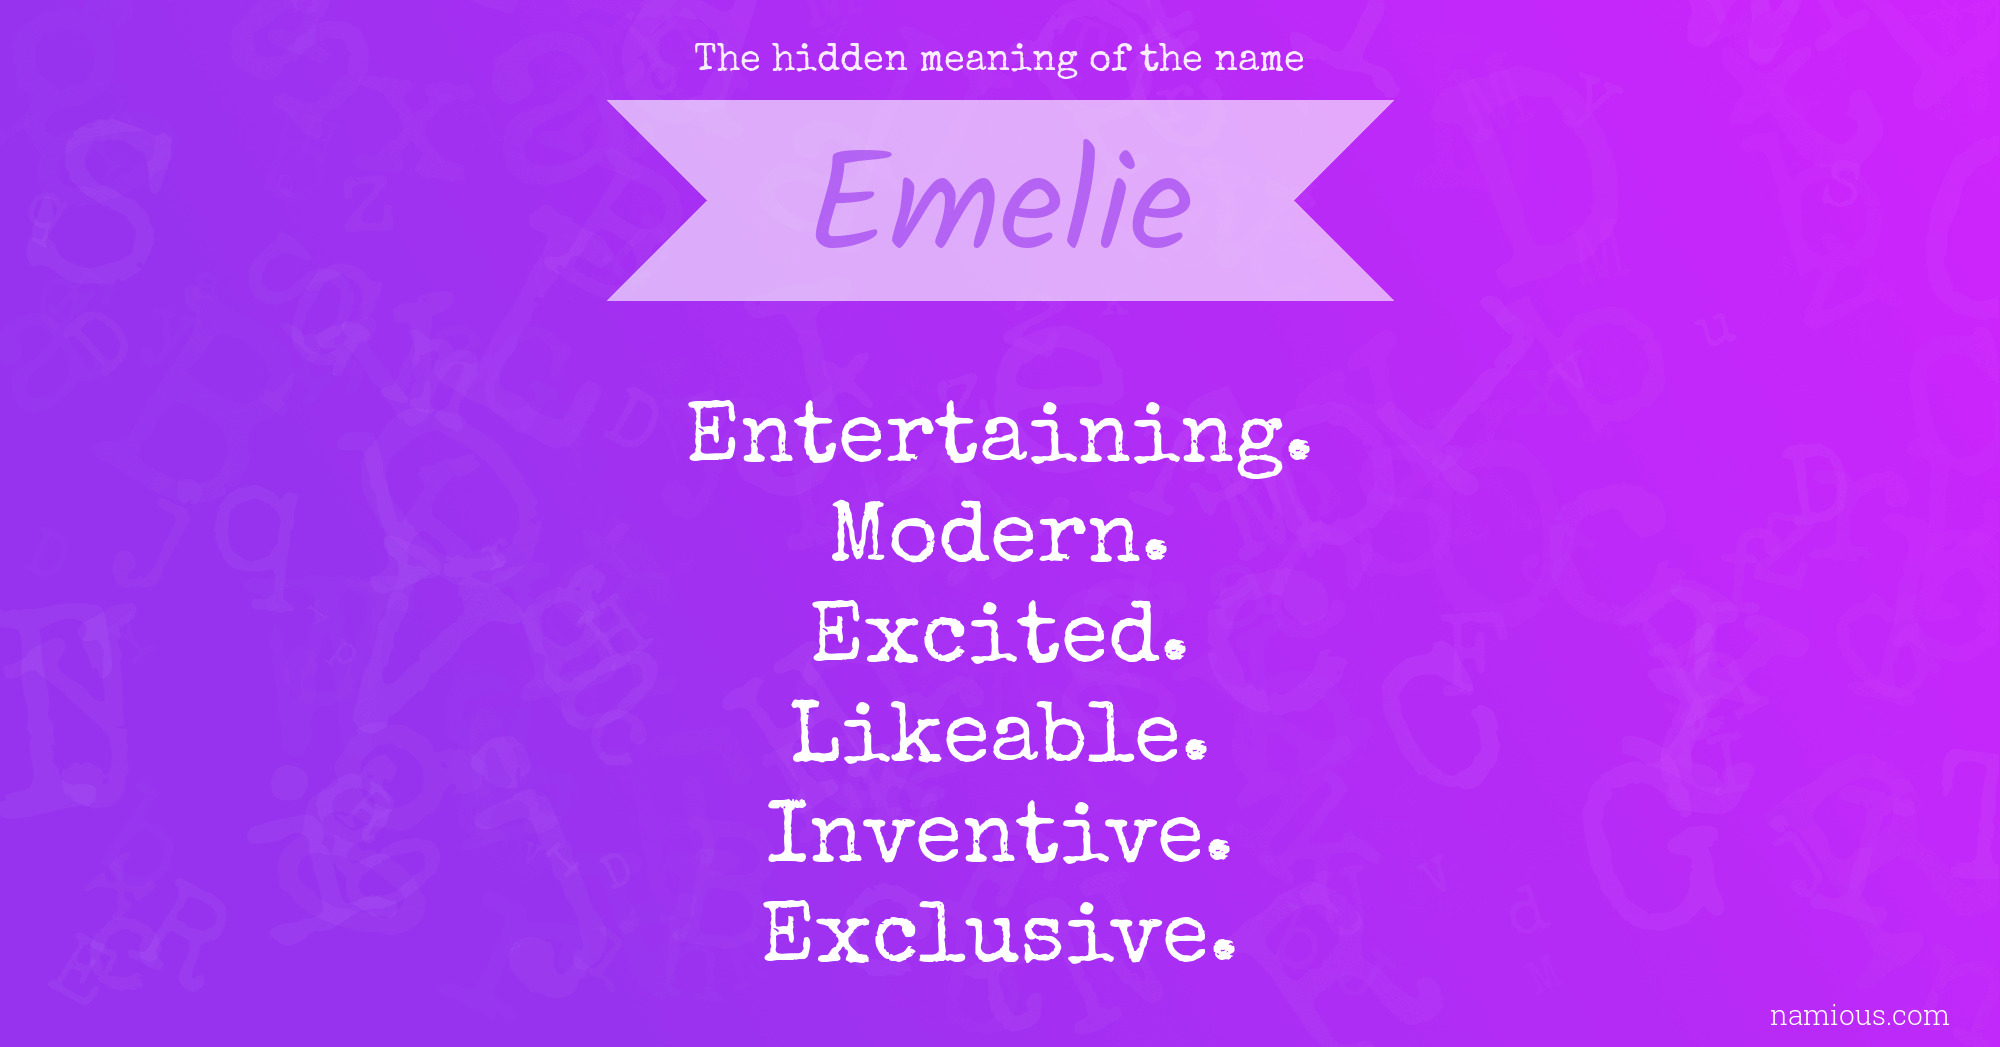 The hidden meaning of the name Emelie